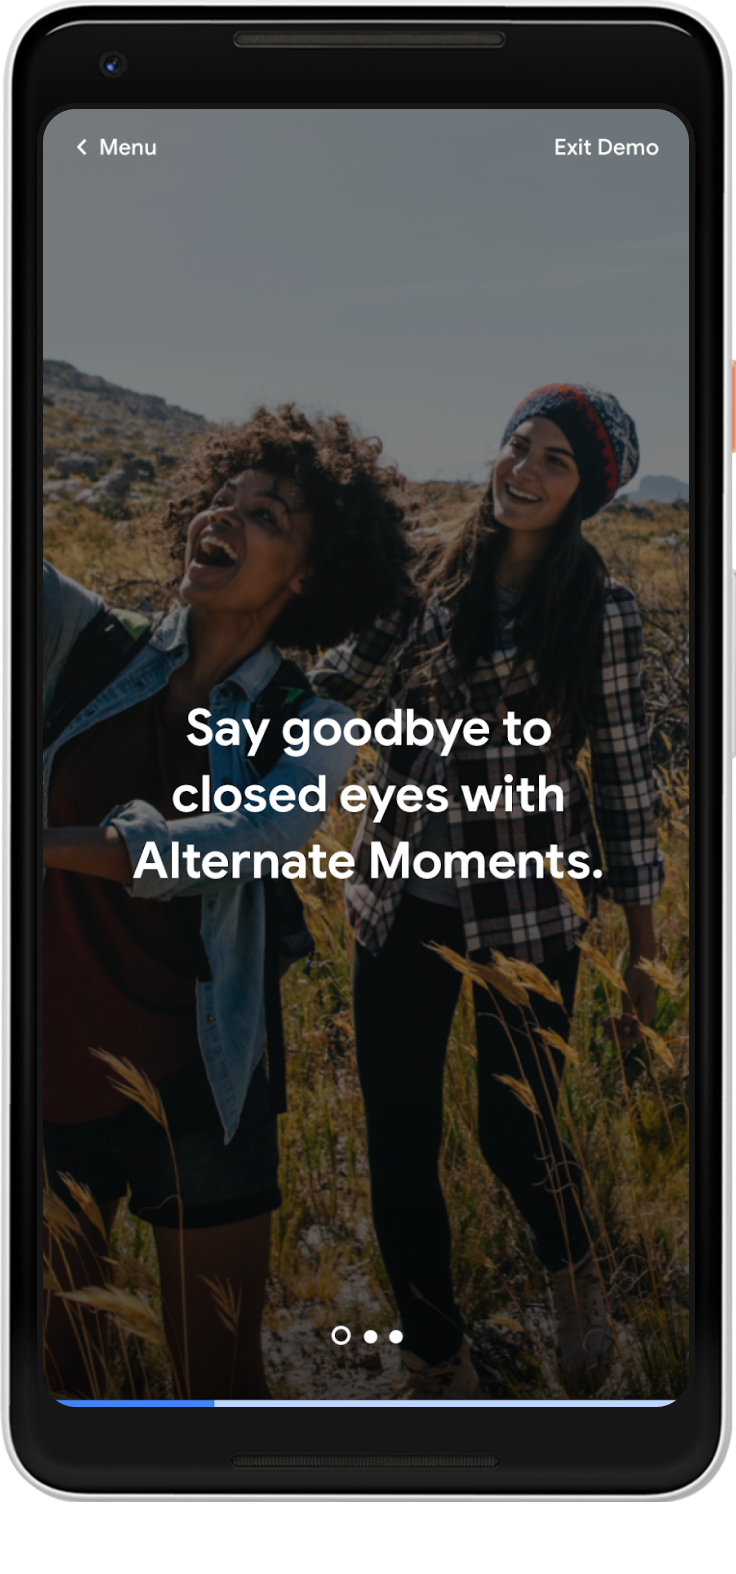 The first feature video for the 'Take brilliant photos' group, with a headline 'Say goodbye to closed eyes with Alternate Moments'